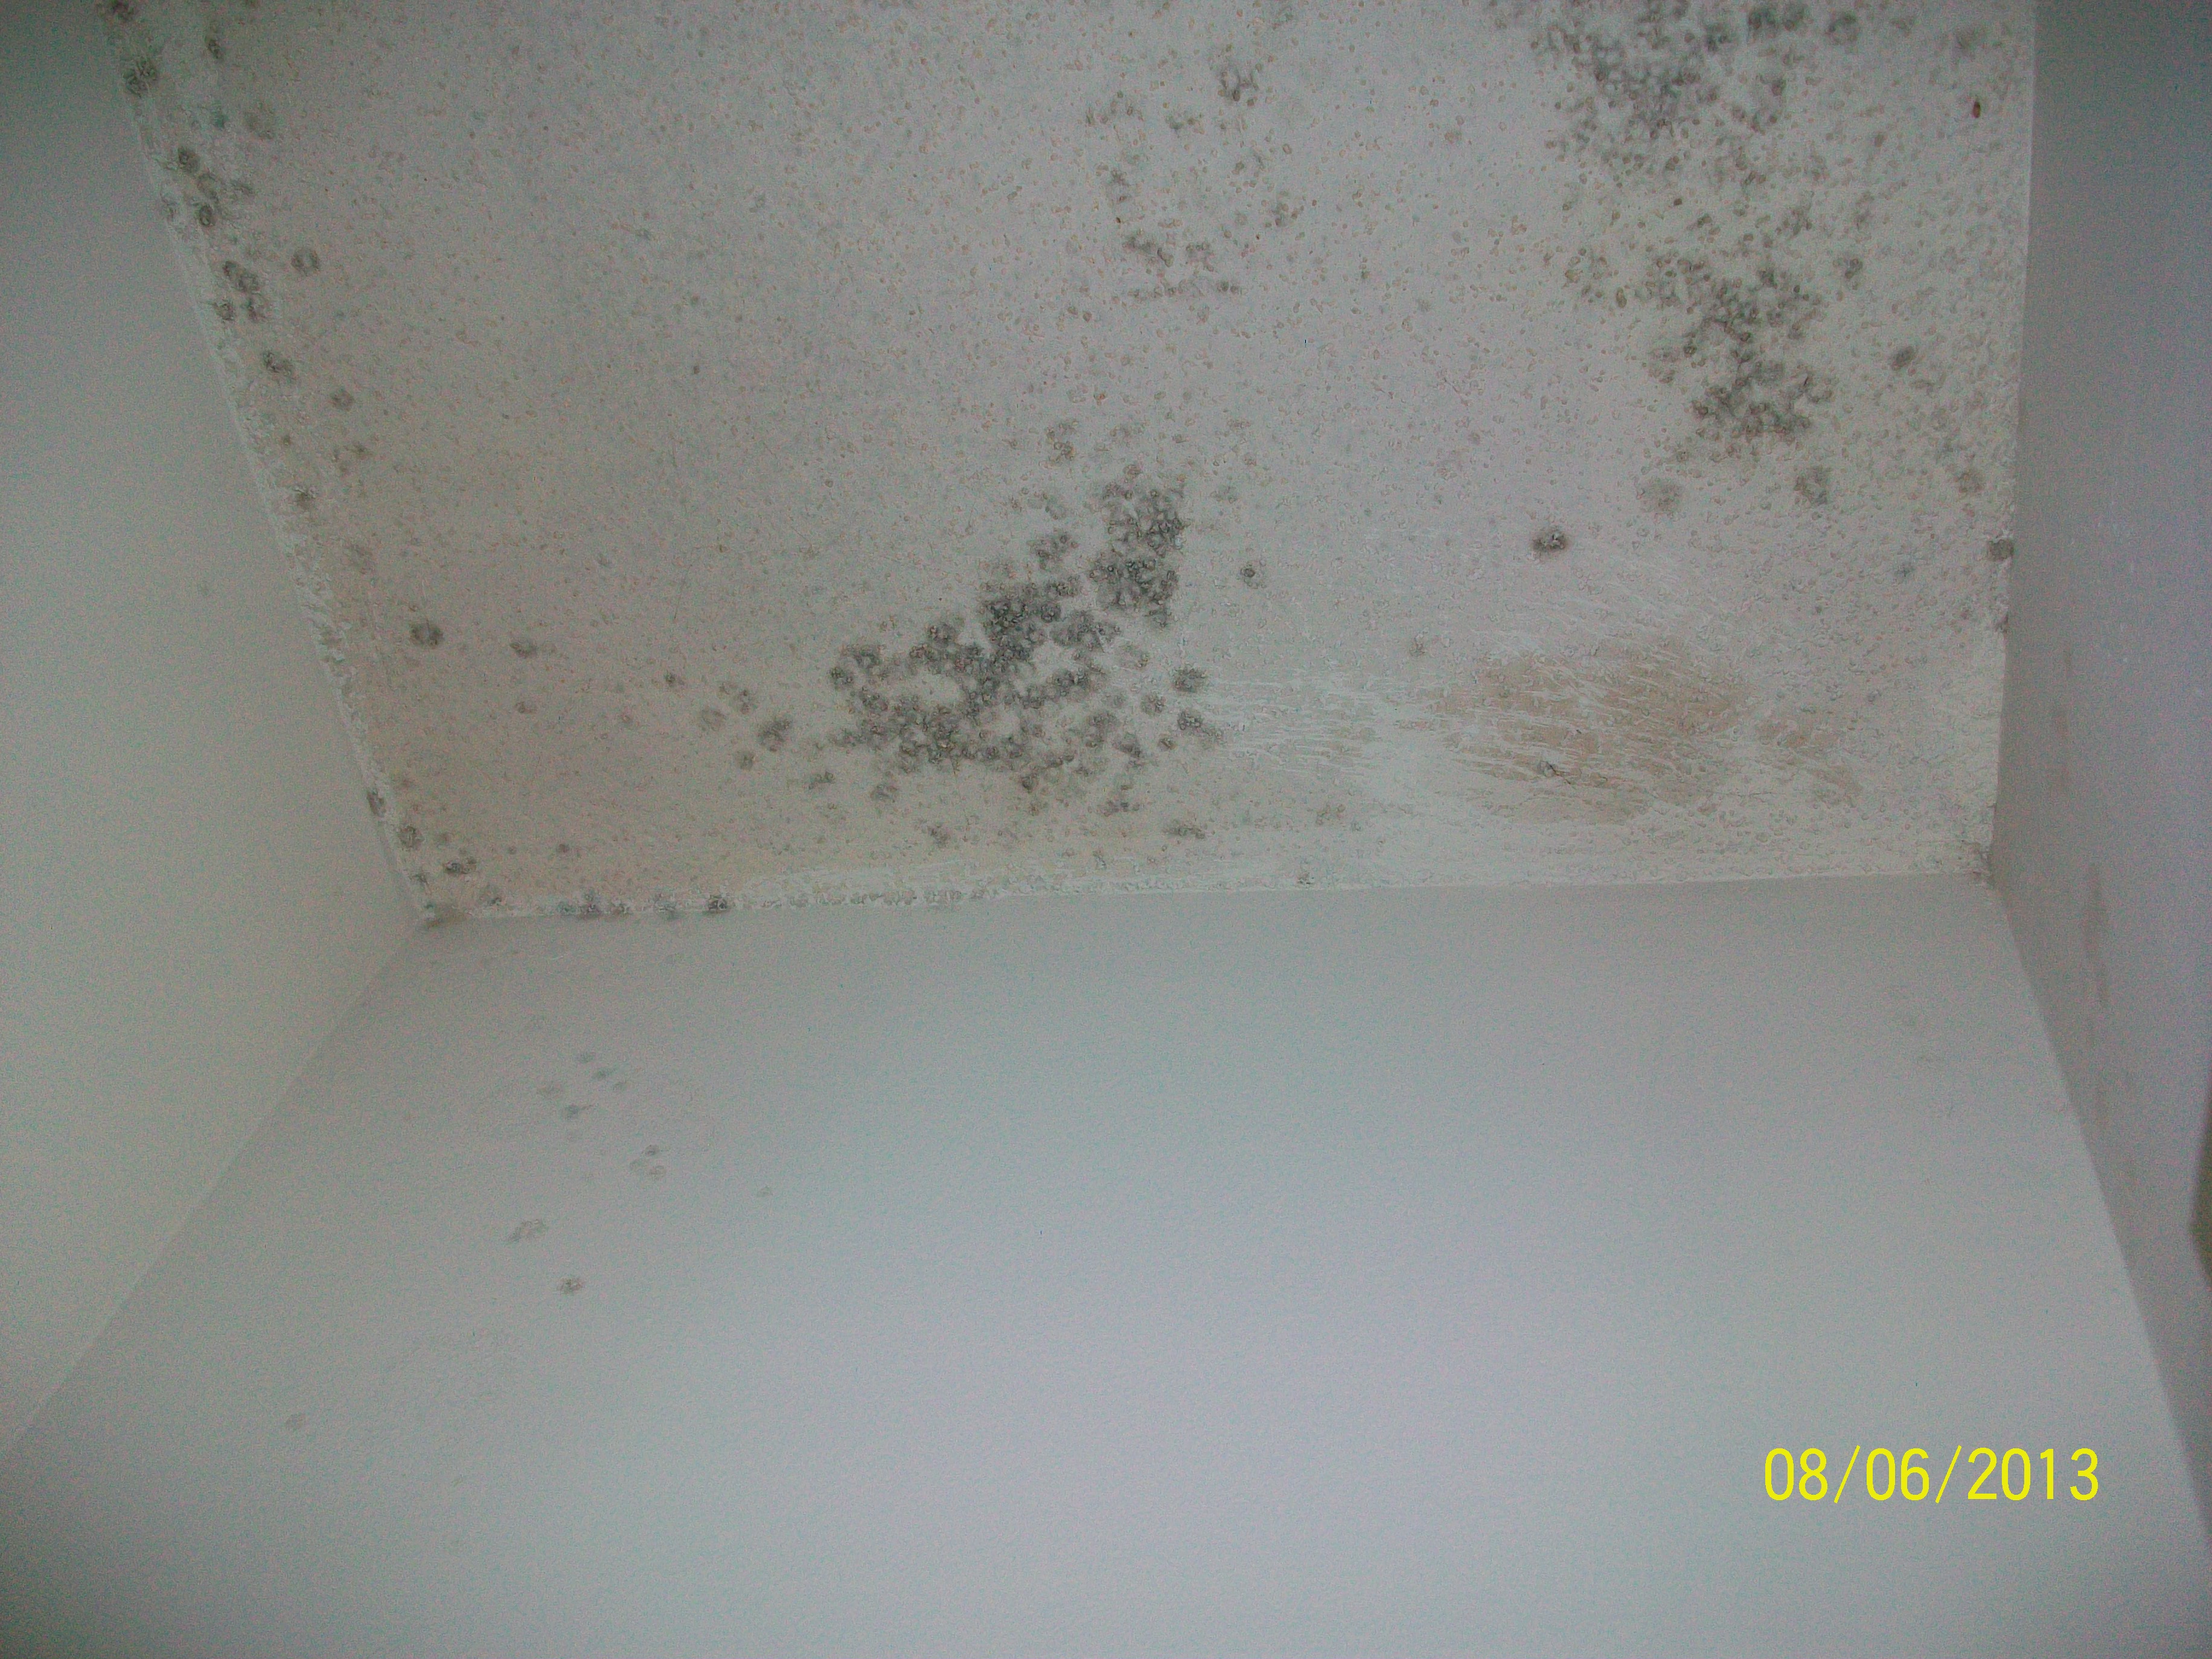 Black Mold - another ceiling